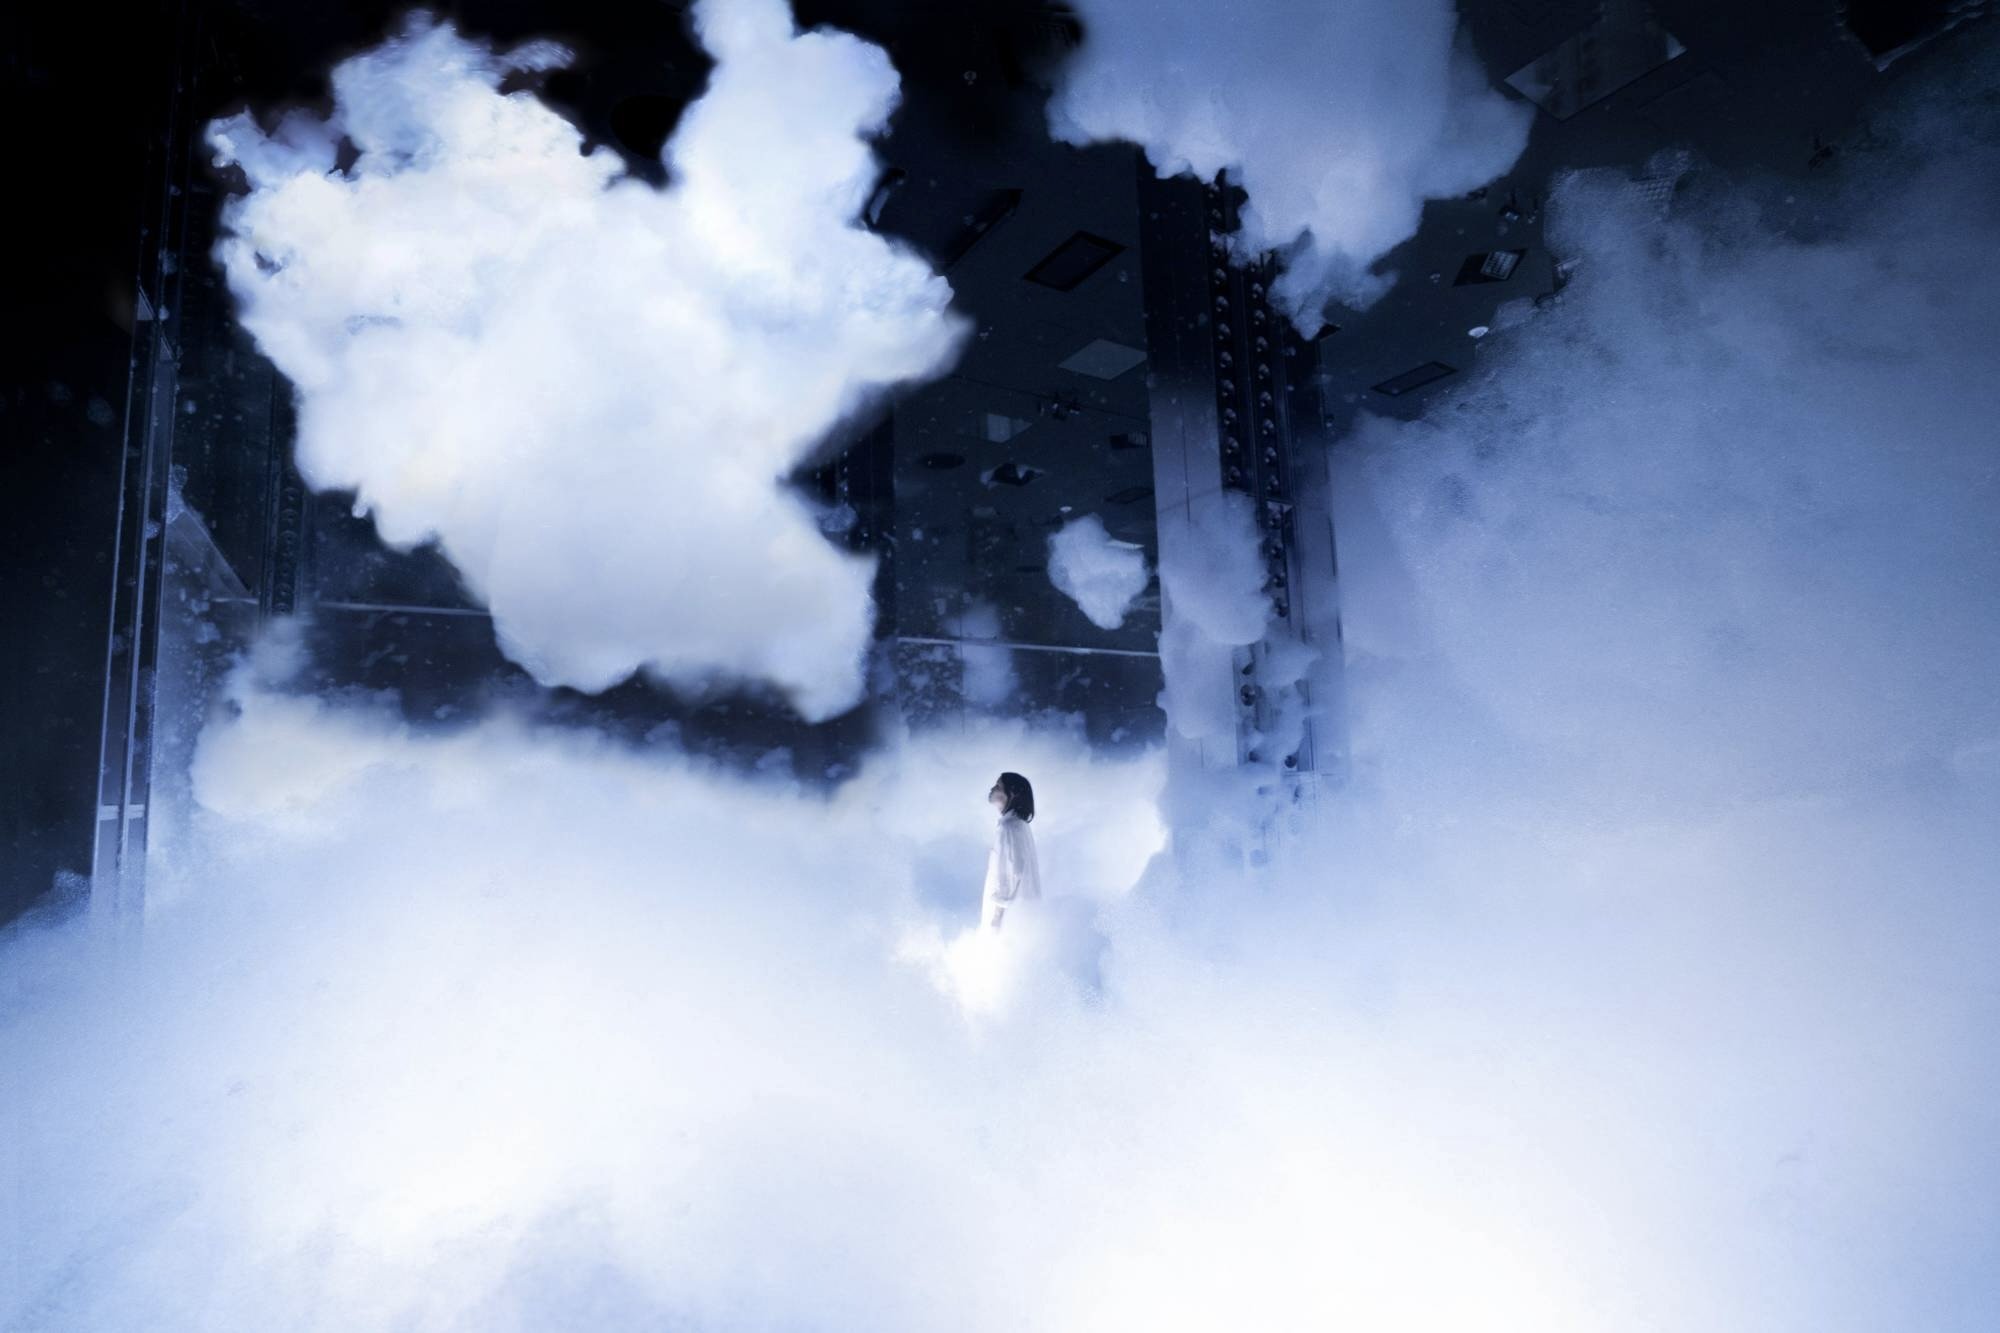 Installation: A large cavernous room fills with "clouds" made of foam.